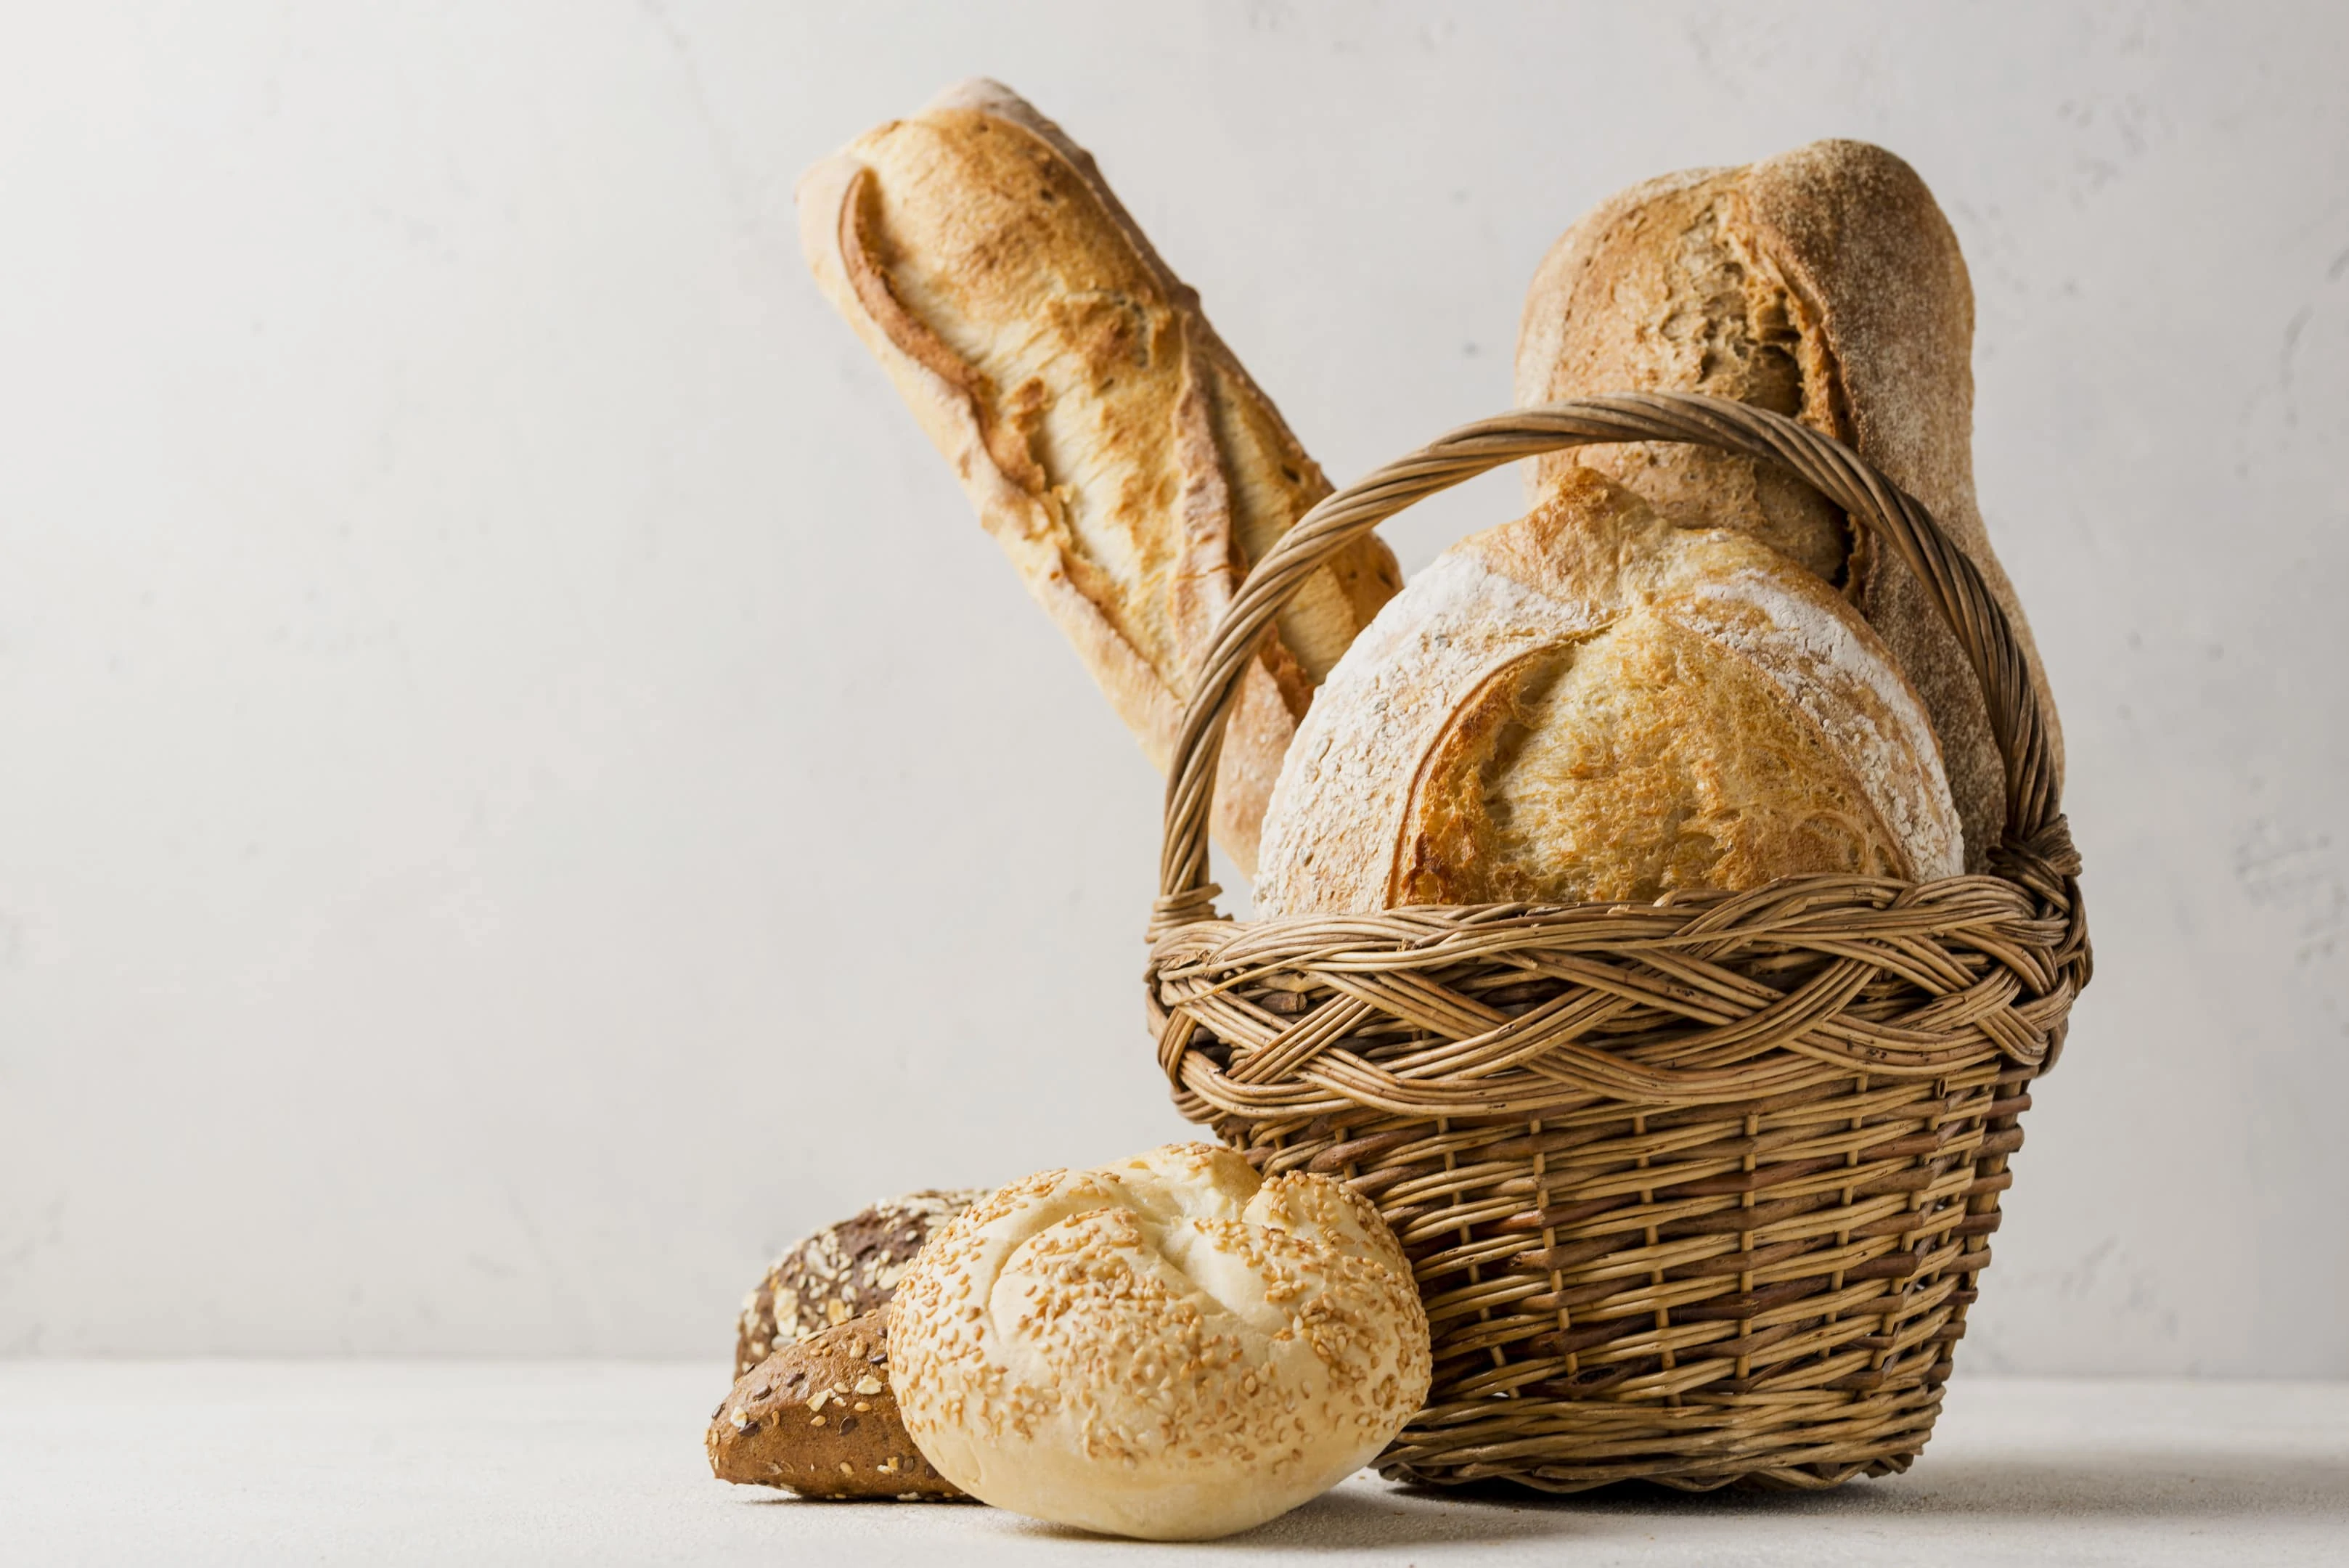 Basket with various white and whole grain breads